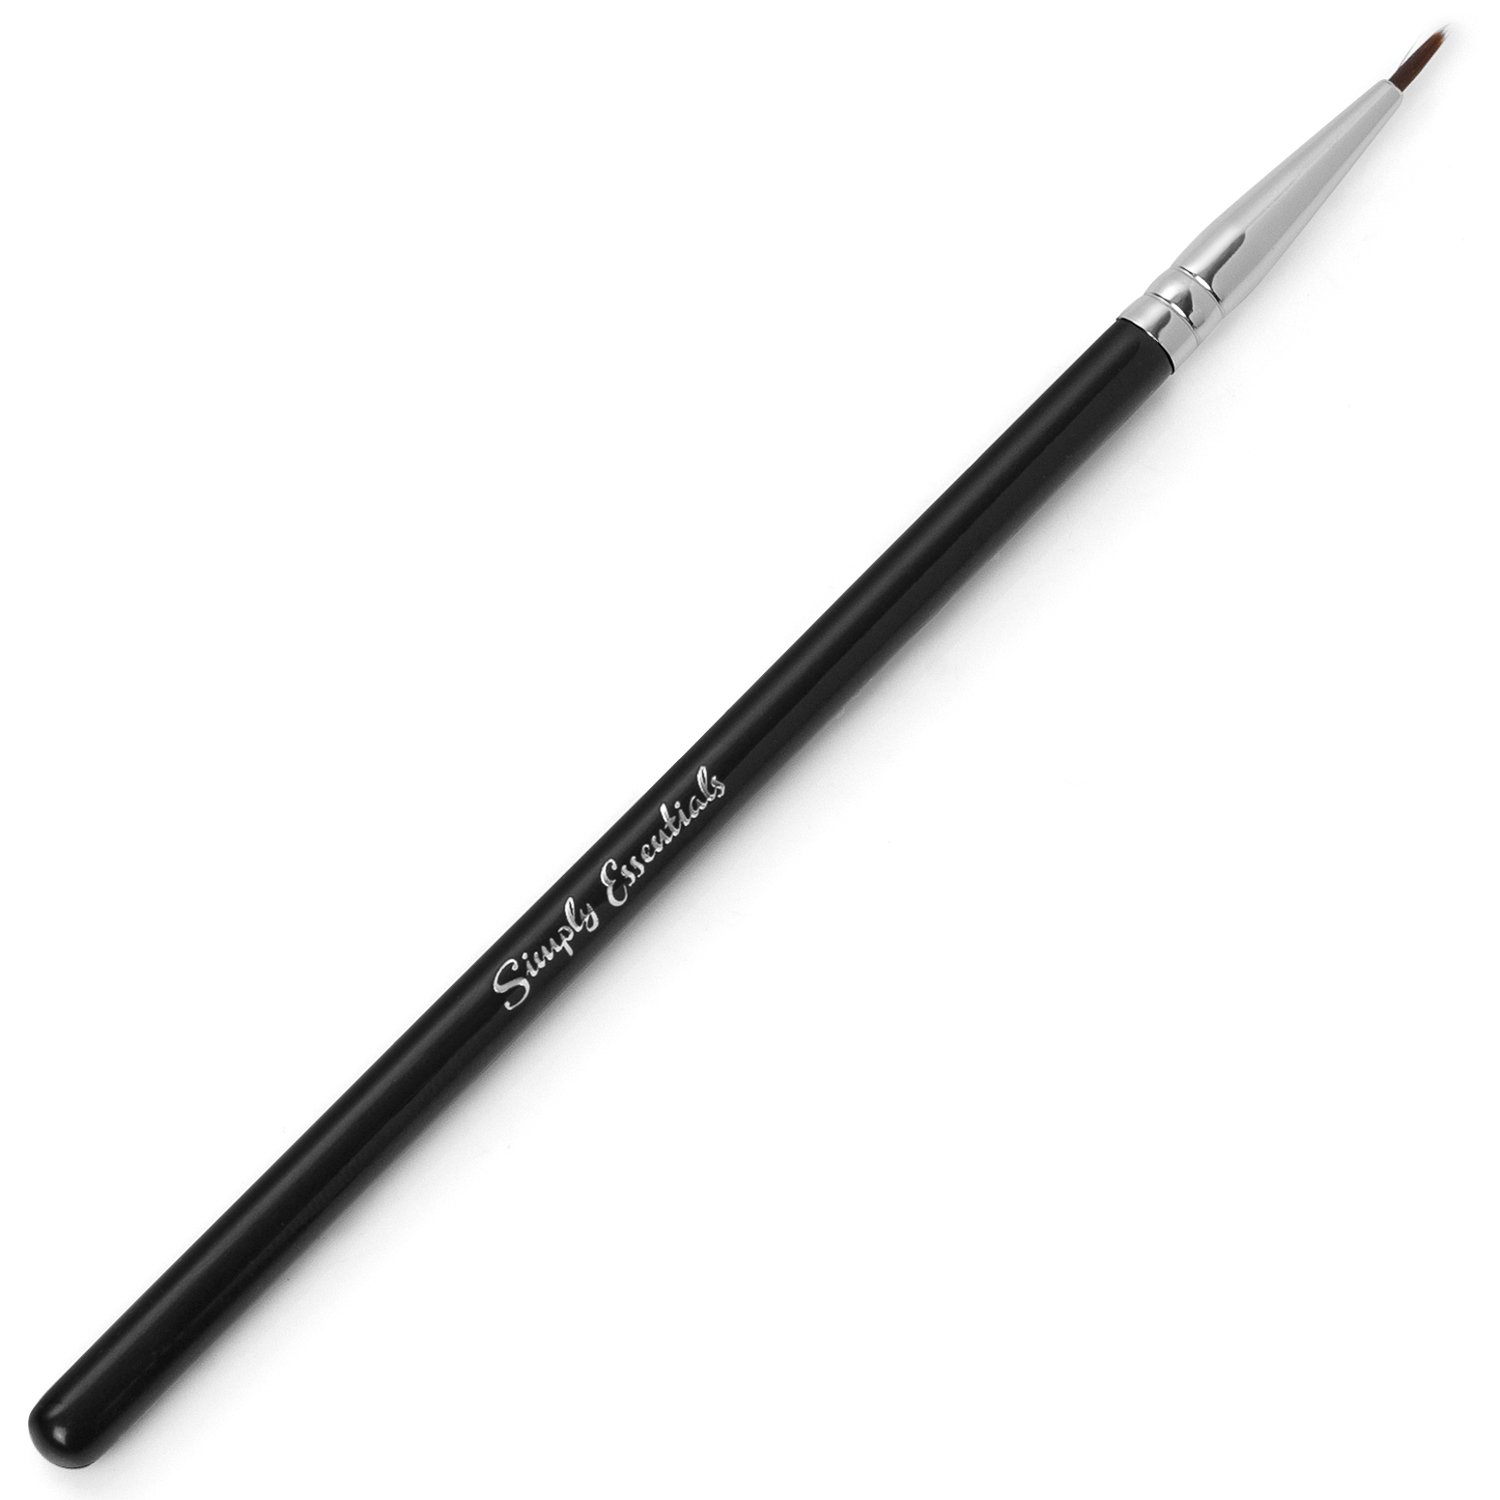 BEST EYELINER MAKEUP BRUSH - Professional Gel Brushes - Premium Quality  Flat Eyeliner Brush at an Economical Price! Use for Fine Lines, Very Thin  Synthetic Bristles.